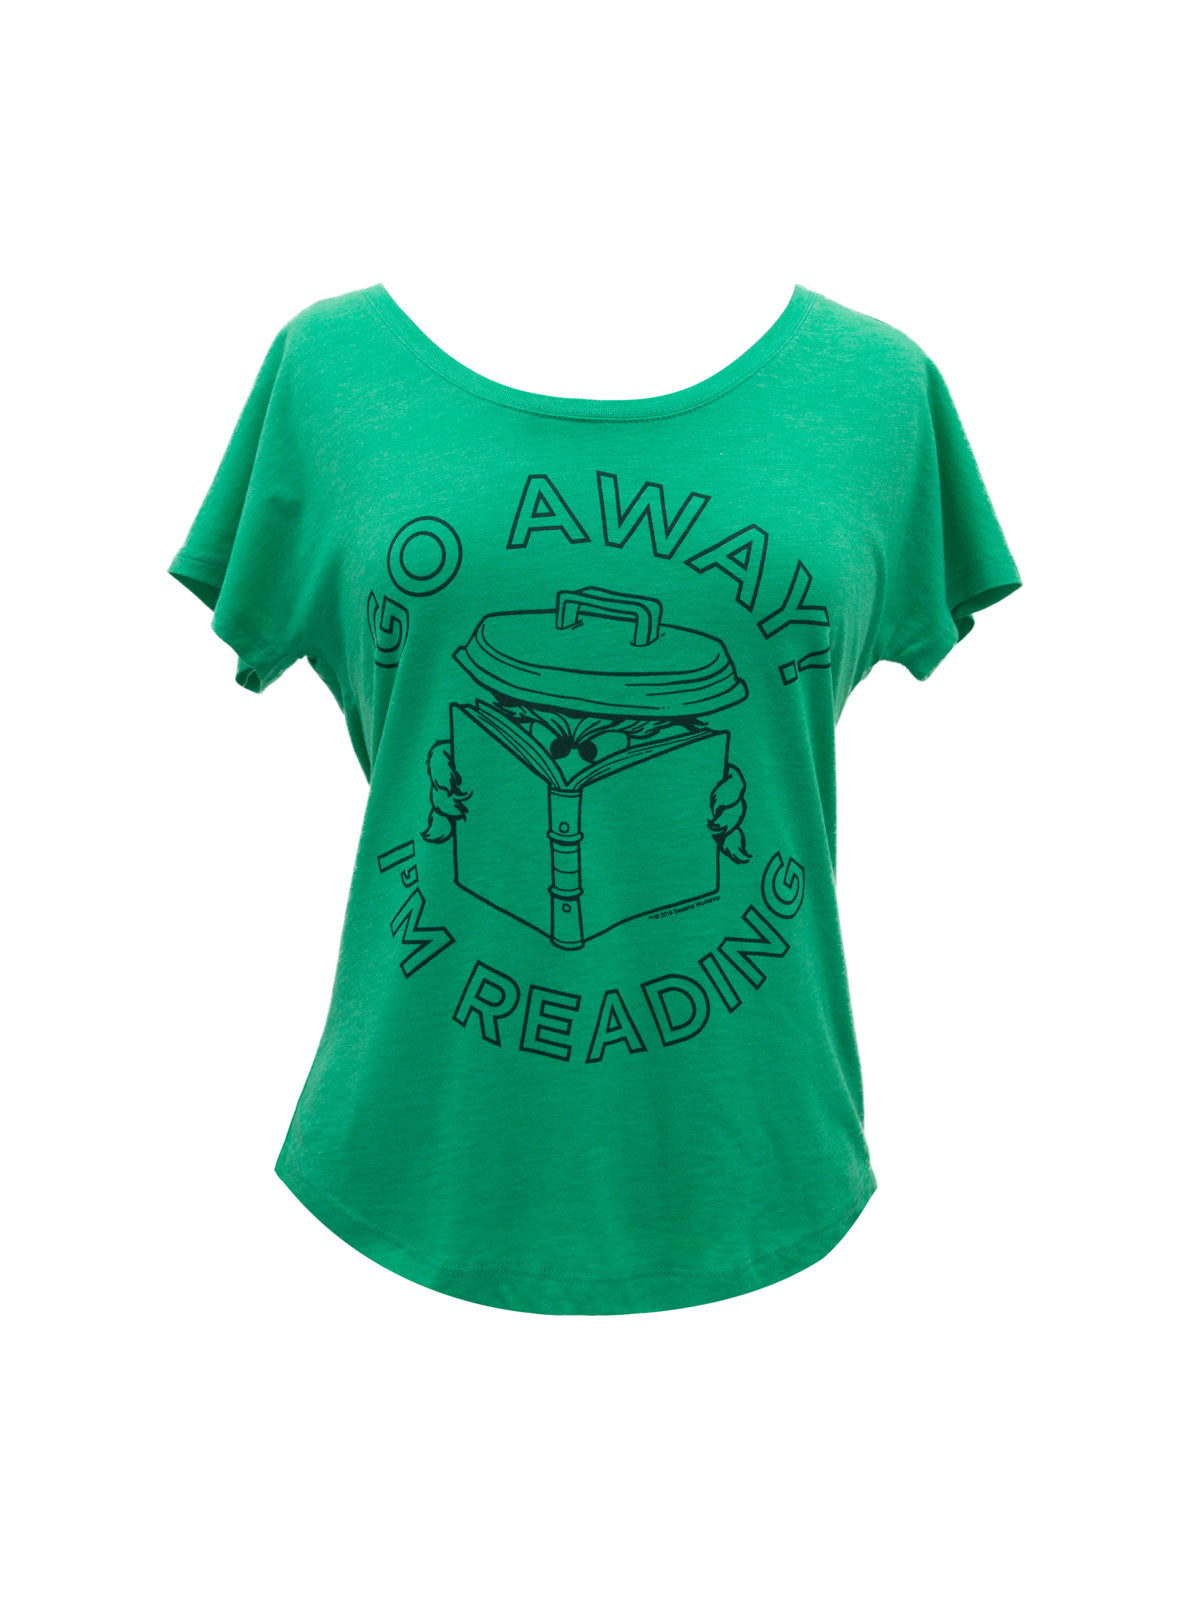 Away I'm Reading Oscar Grouch women's relaxed fit tee — Out Print